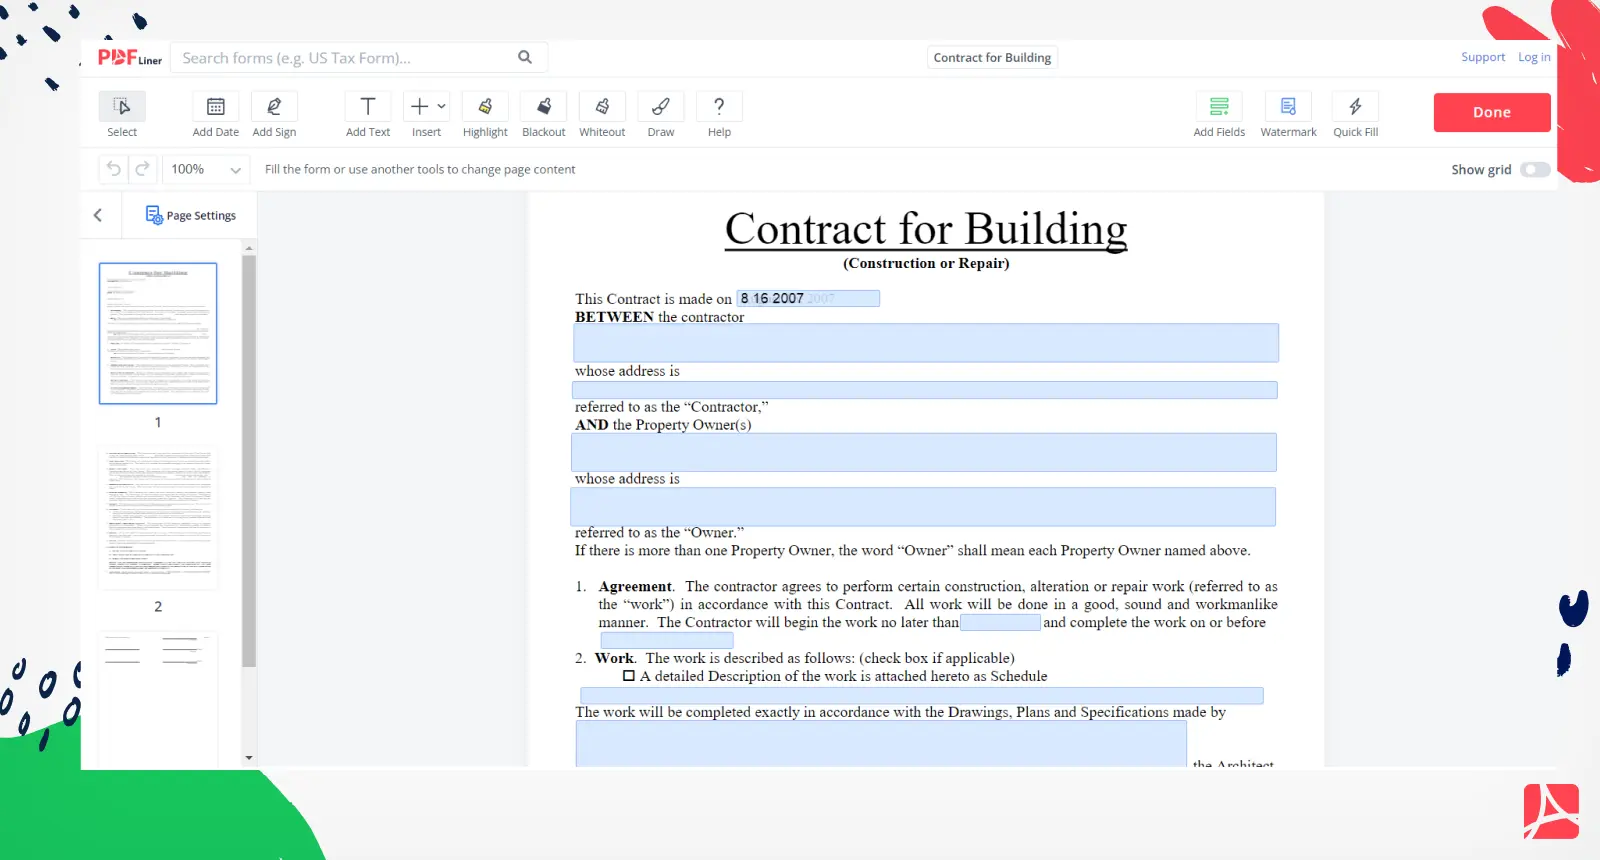 Contract for Building Form Screenshot